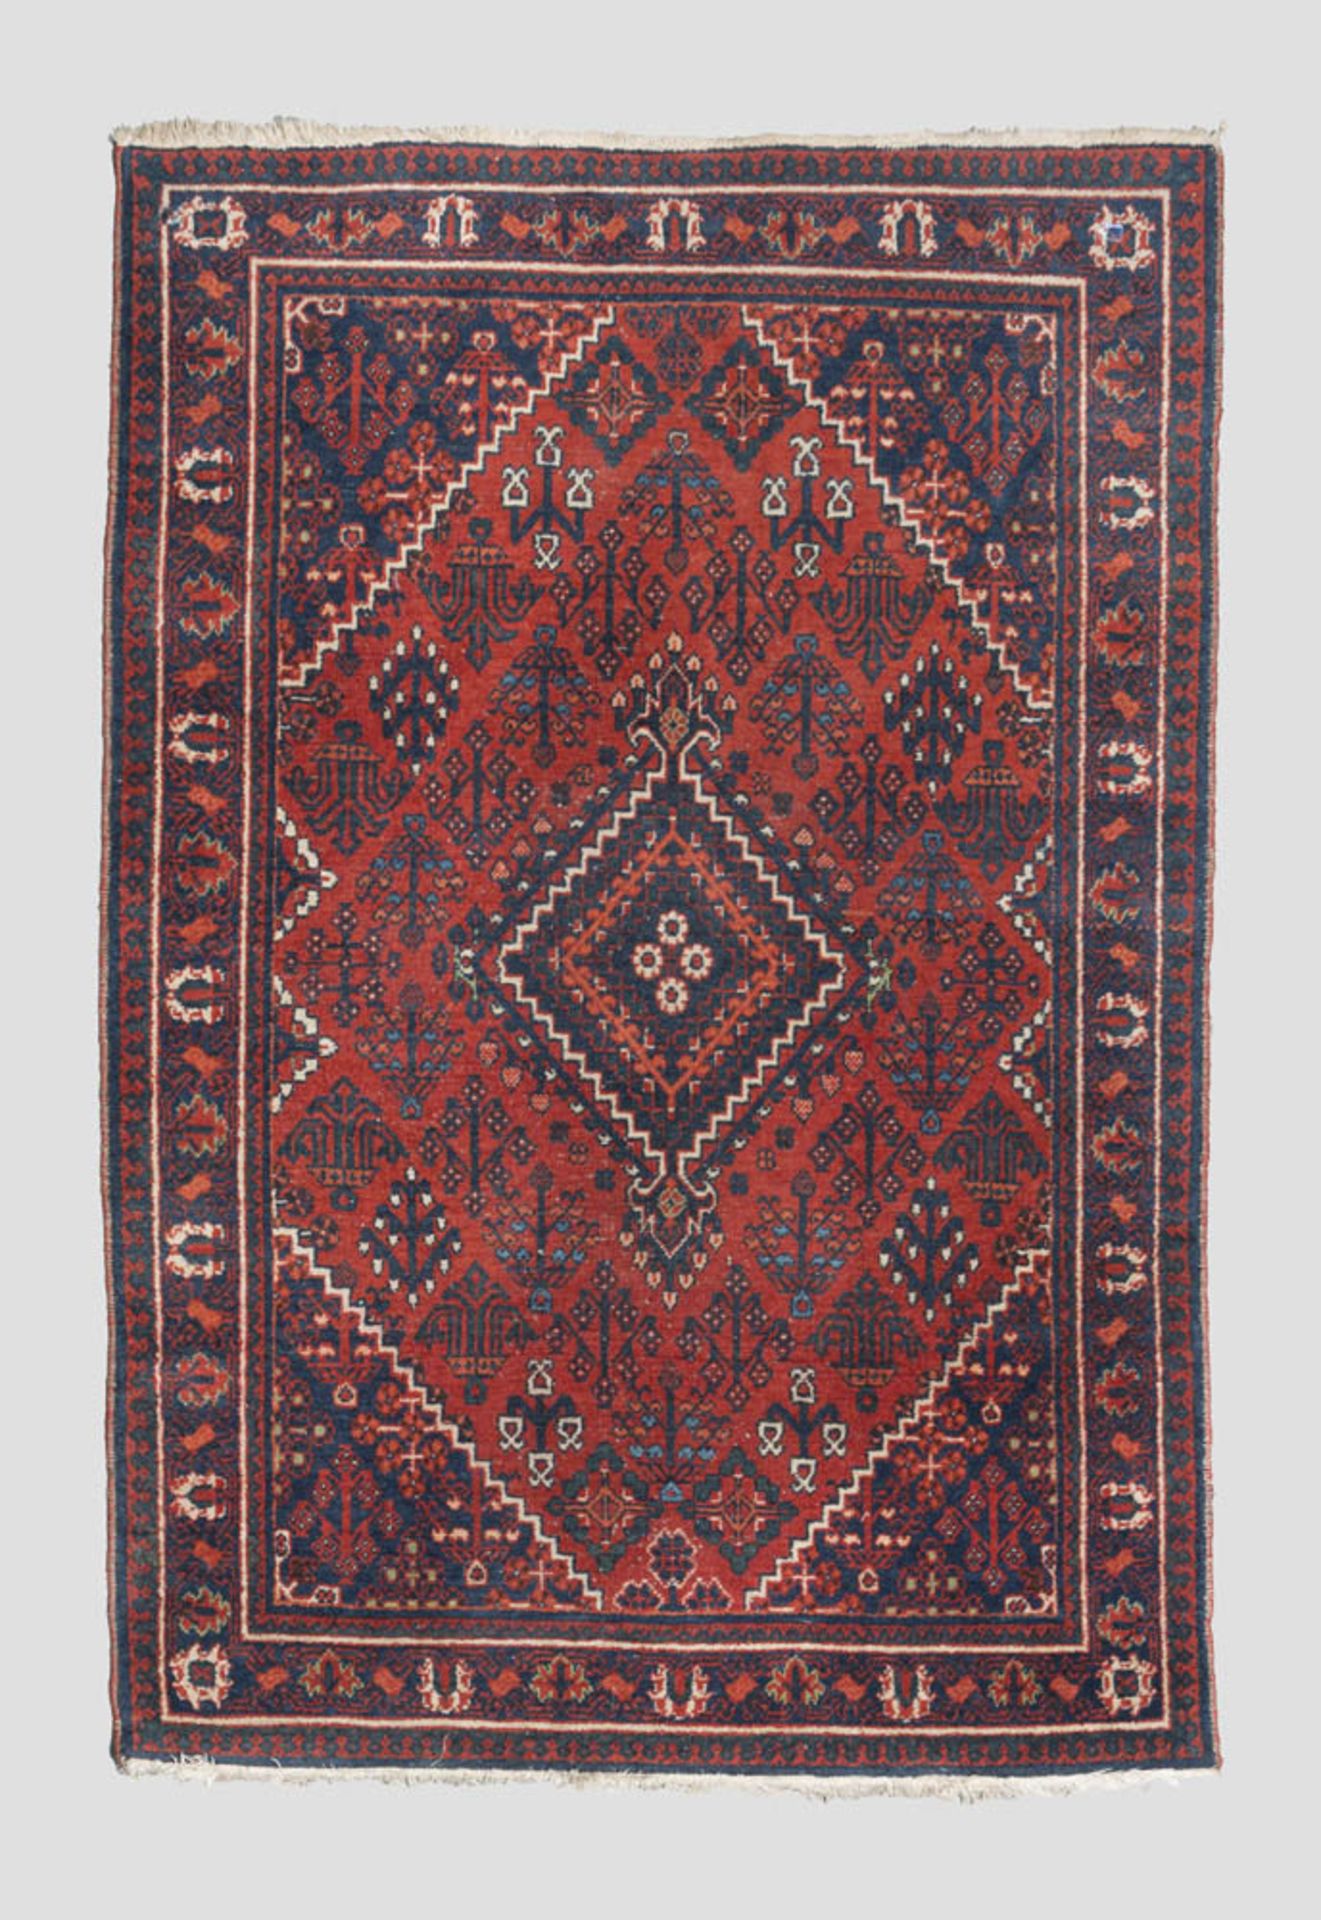 PERSIAN VISS CARPET, FIRST HALF 20TH CENTURY with rhomboid medallions and secondary motifs with